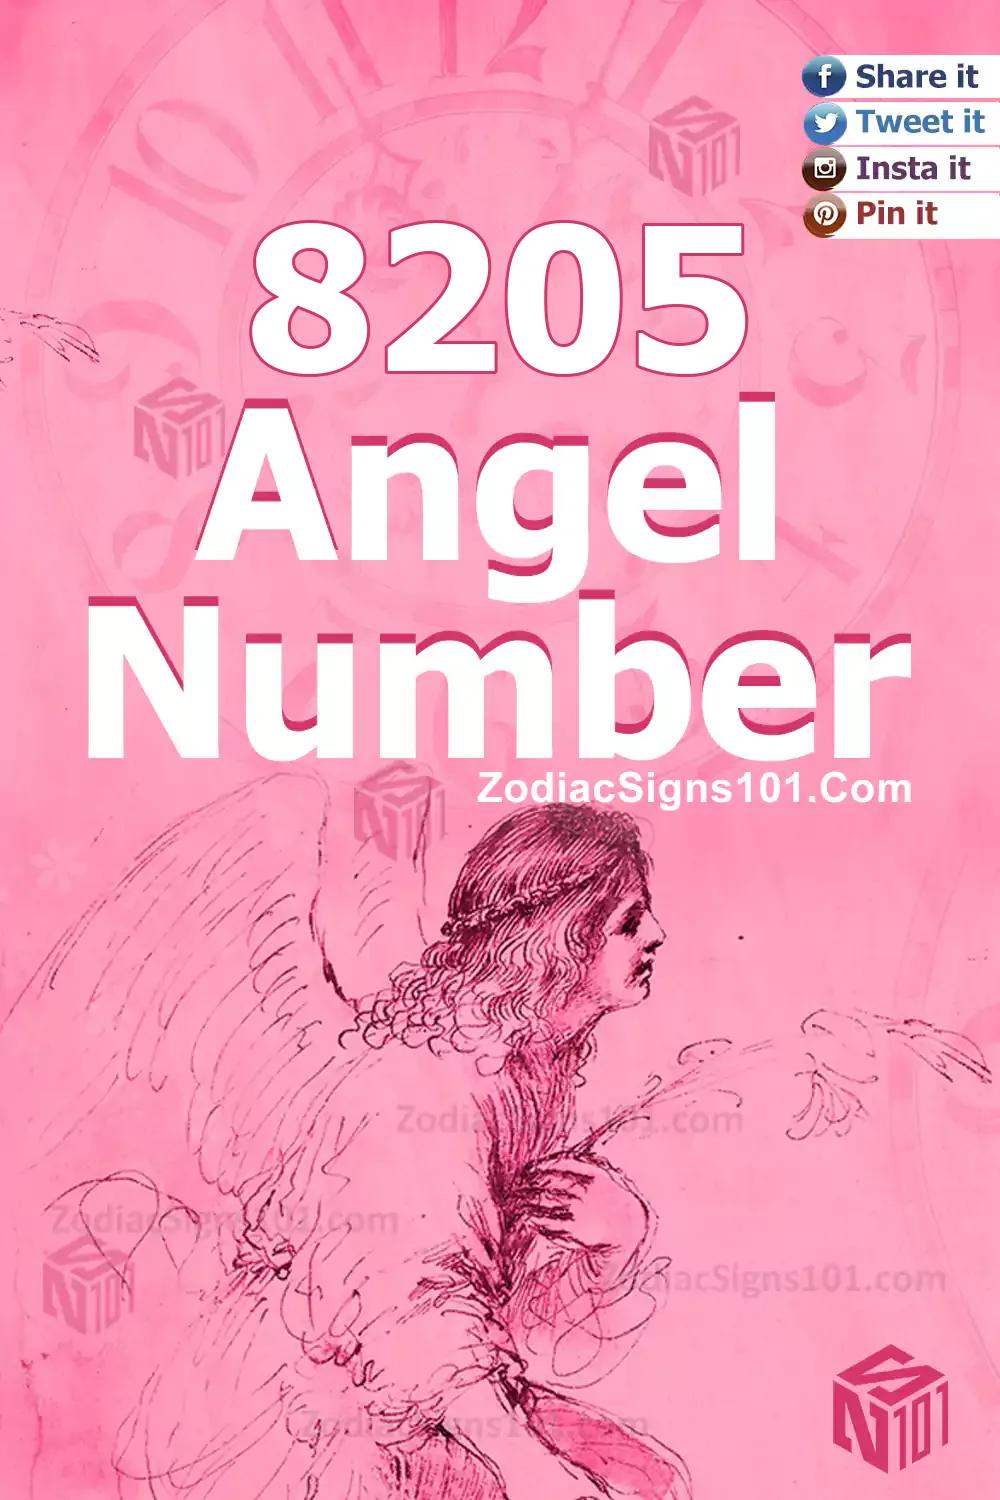 8205 Angel Number Meaning